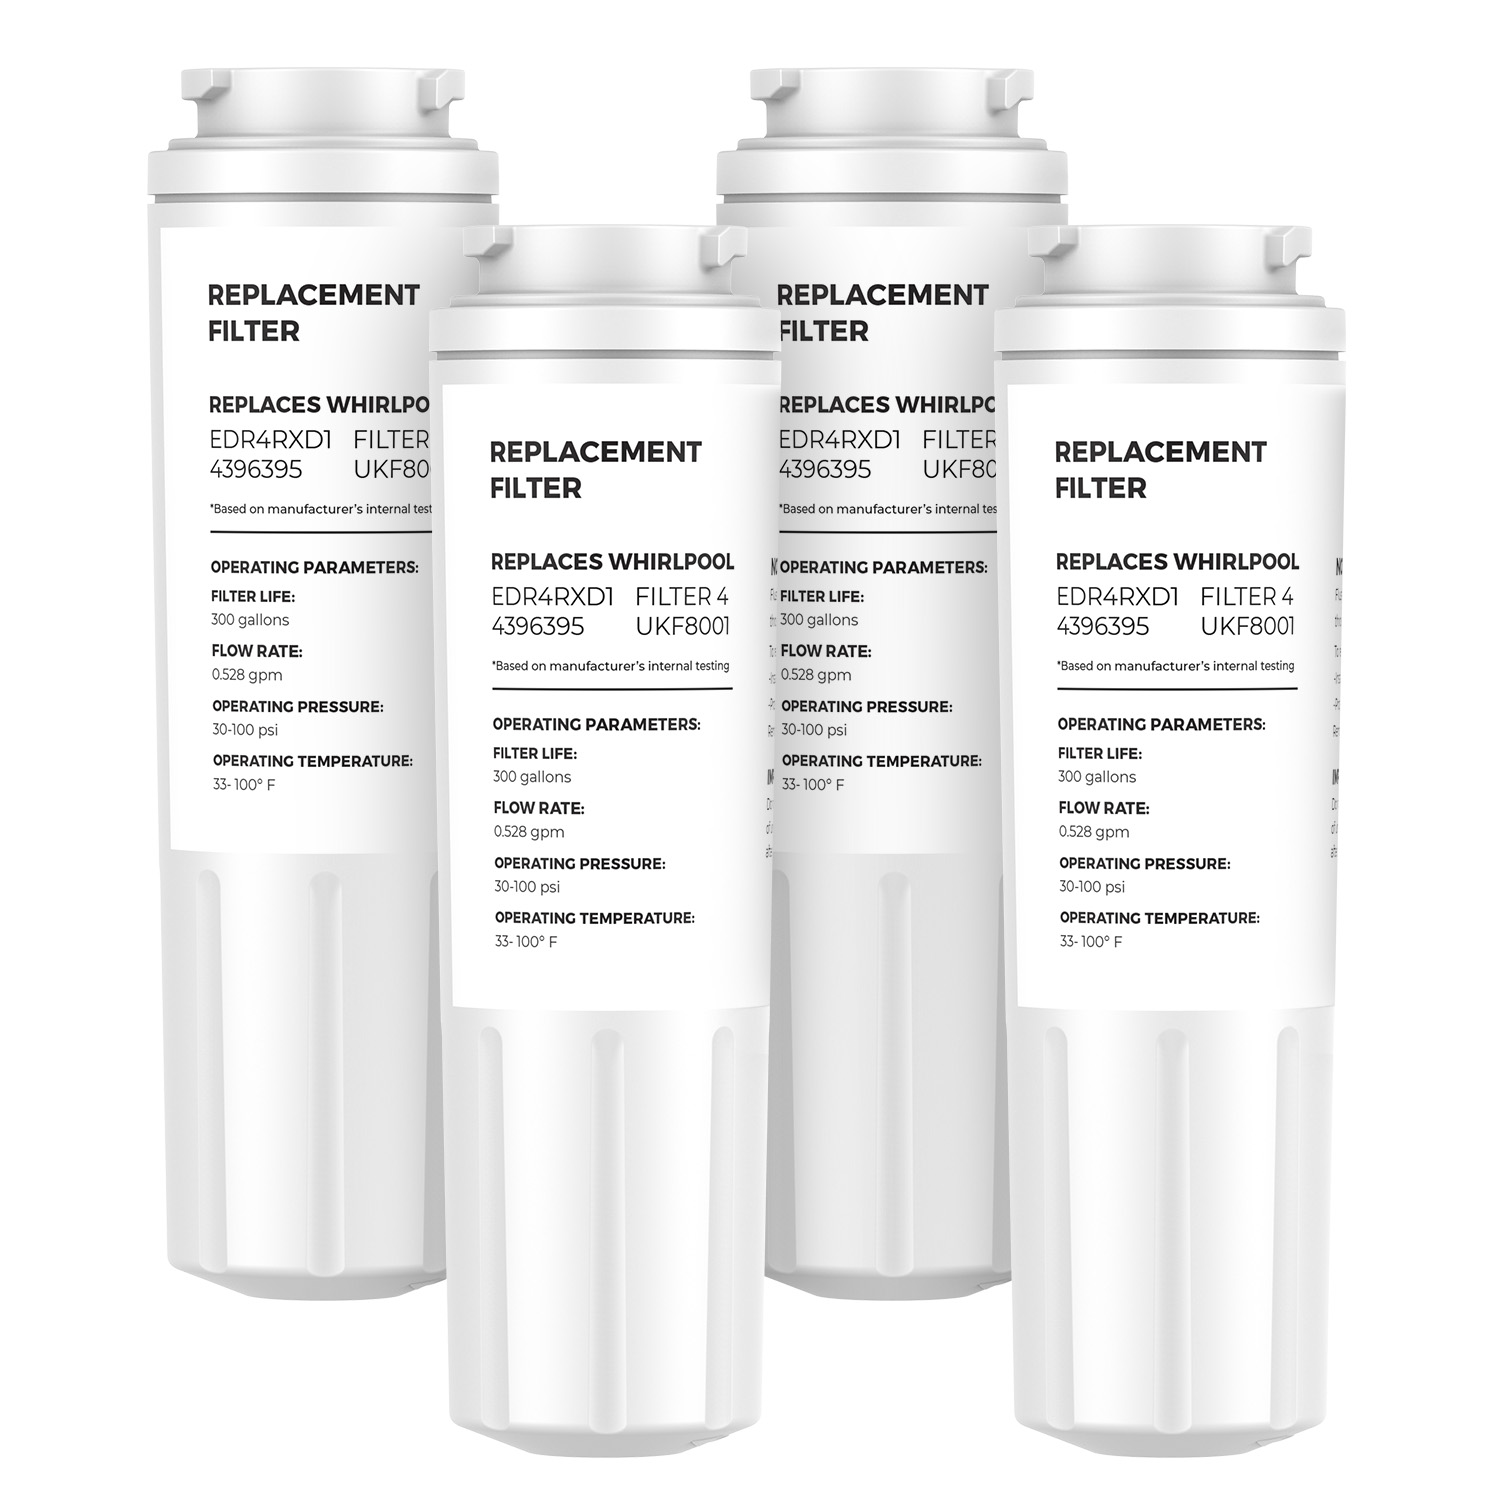 Replacement for EDR4RXD1, UKF8001, 4396395, Filter 4 Water Filter 4 Packs Made by sellfilter